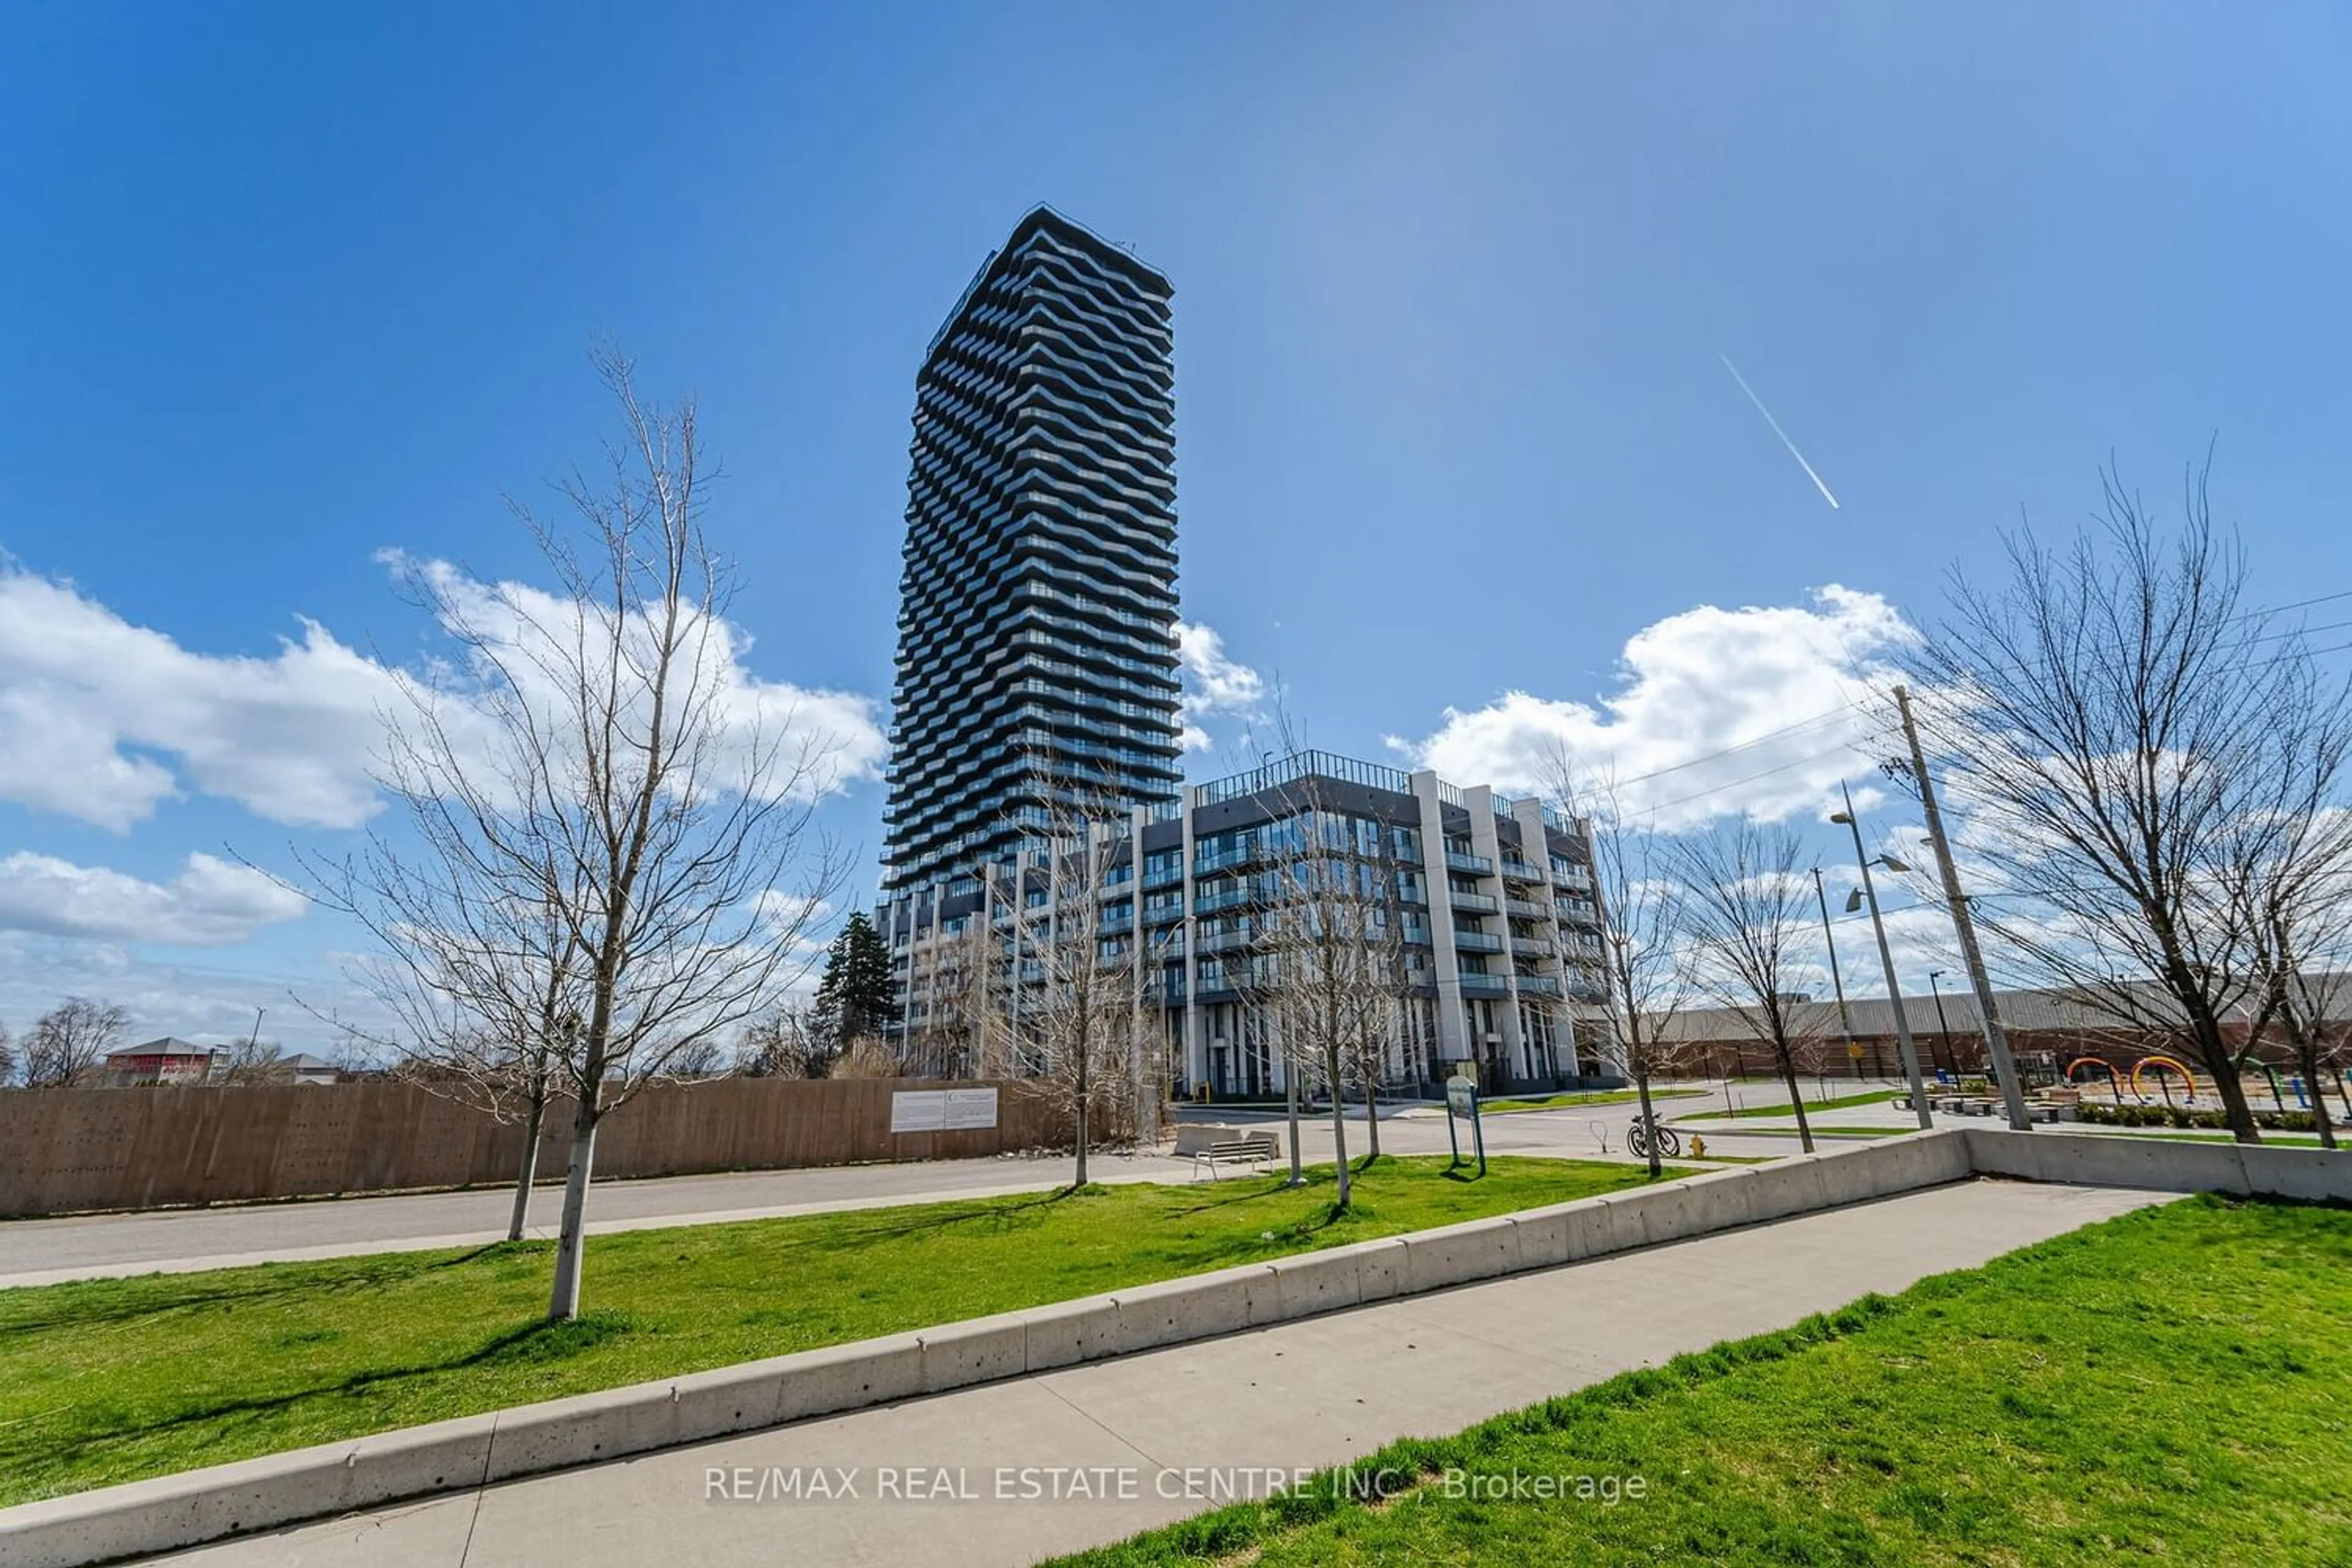 A pic from exterior of the house or condo for 36 Zorra St #2606, Toronto Ontario M8Z 4Z7